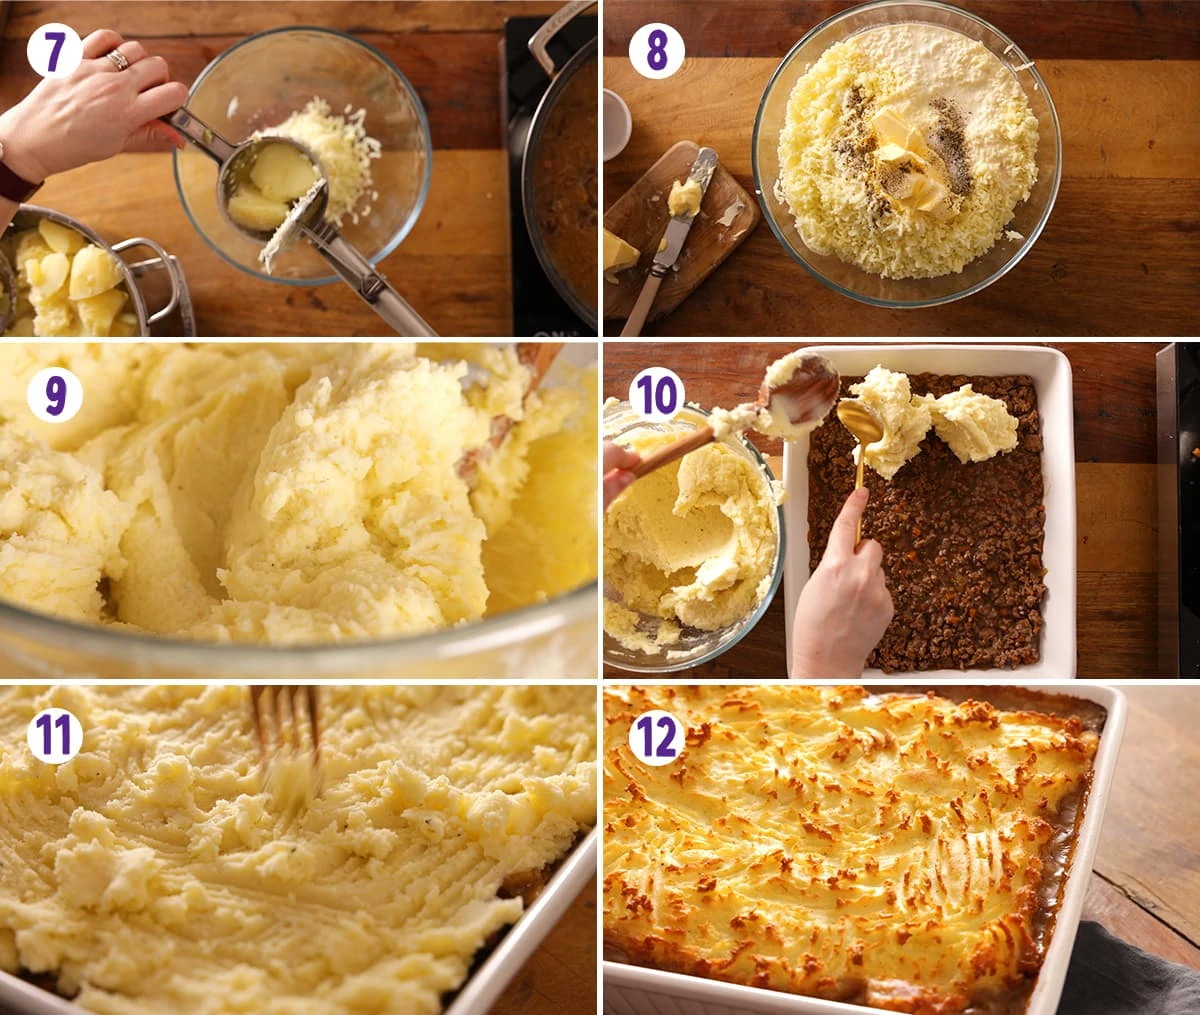 6 image collage showing the final steps for making shepherds pie.